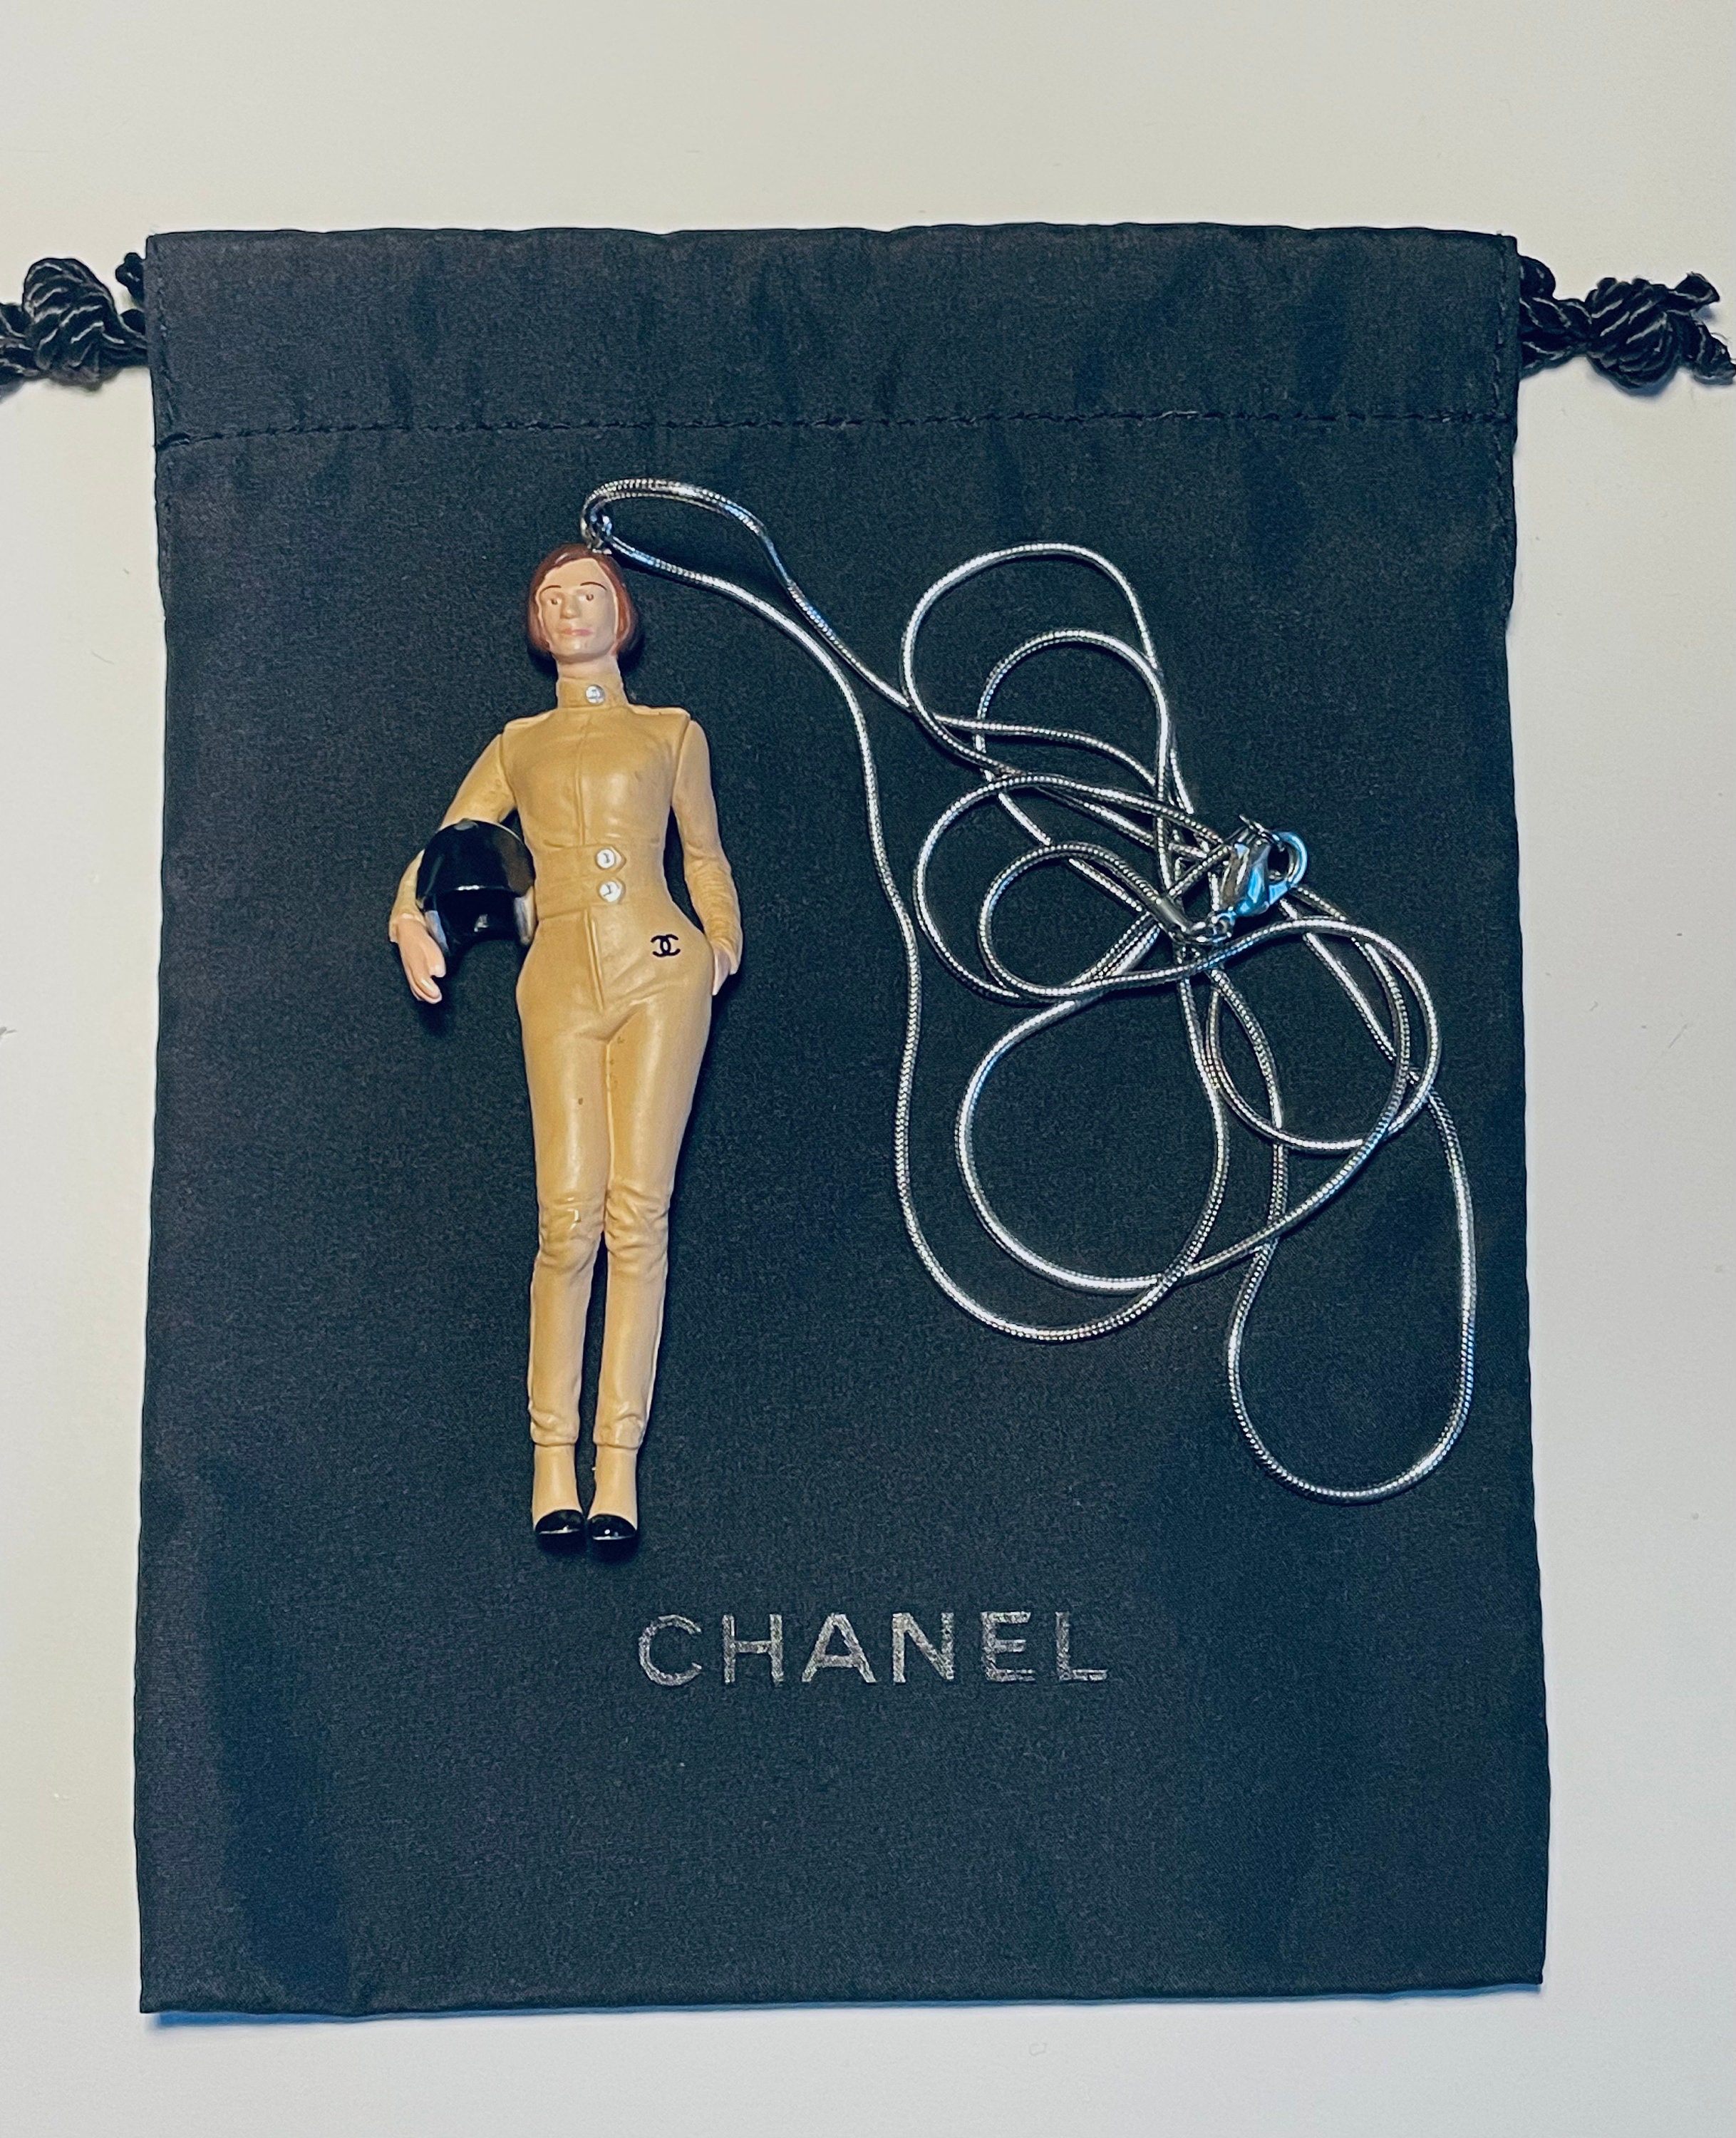 Chanel VIP gift from Chanel beauty boutique N5 L'eau set of ribbons + bonus  NEW